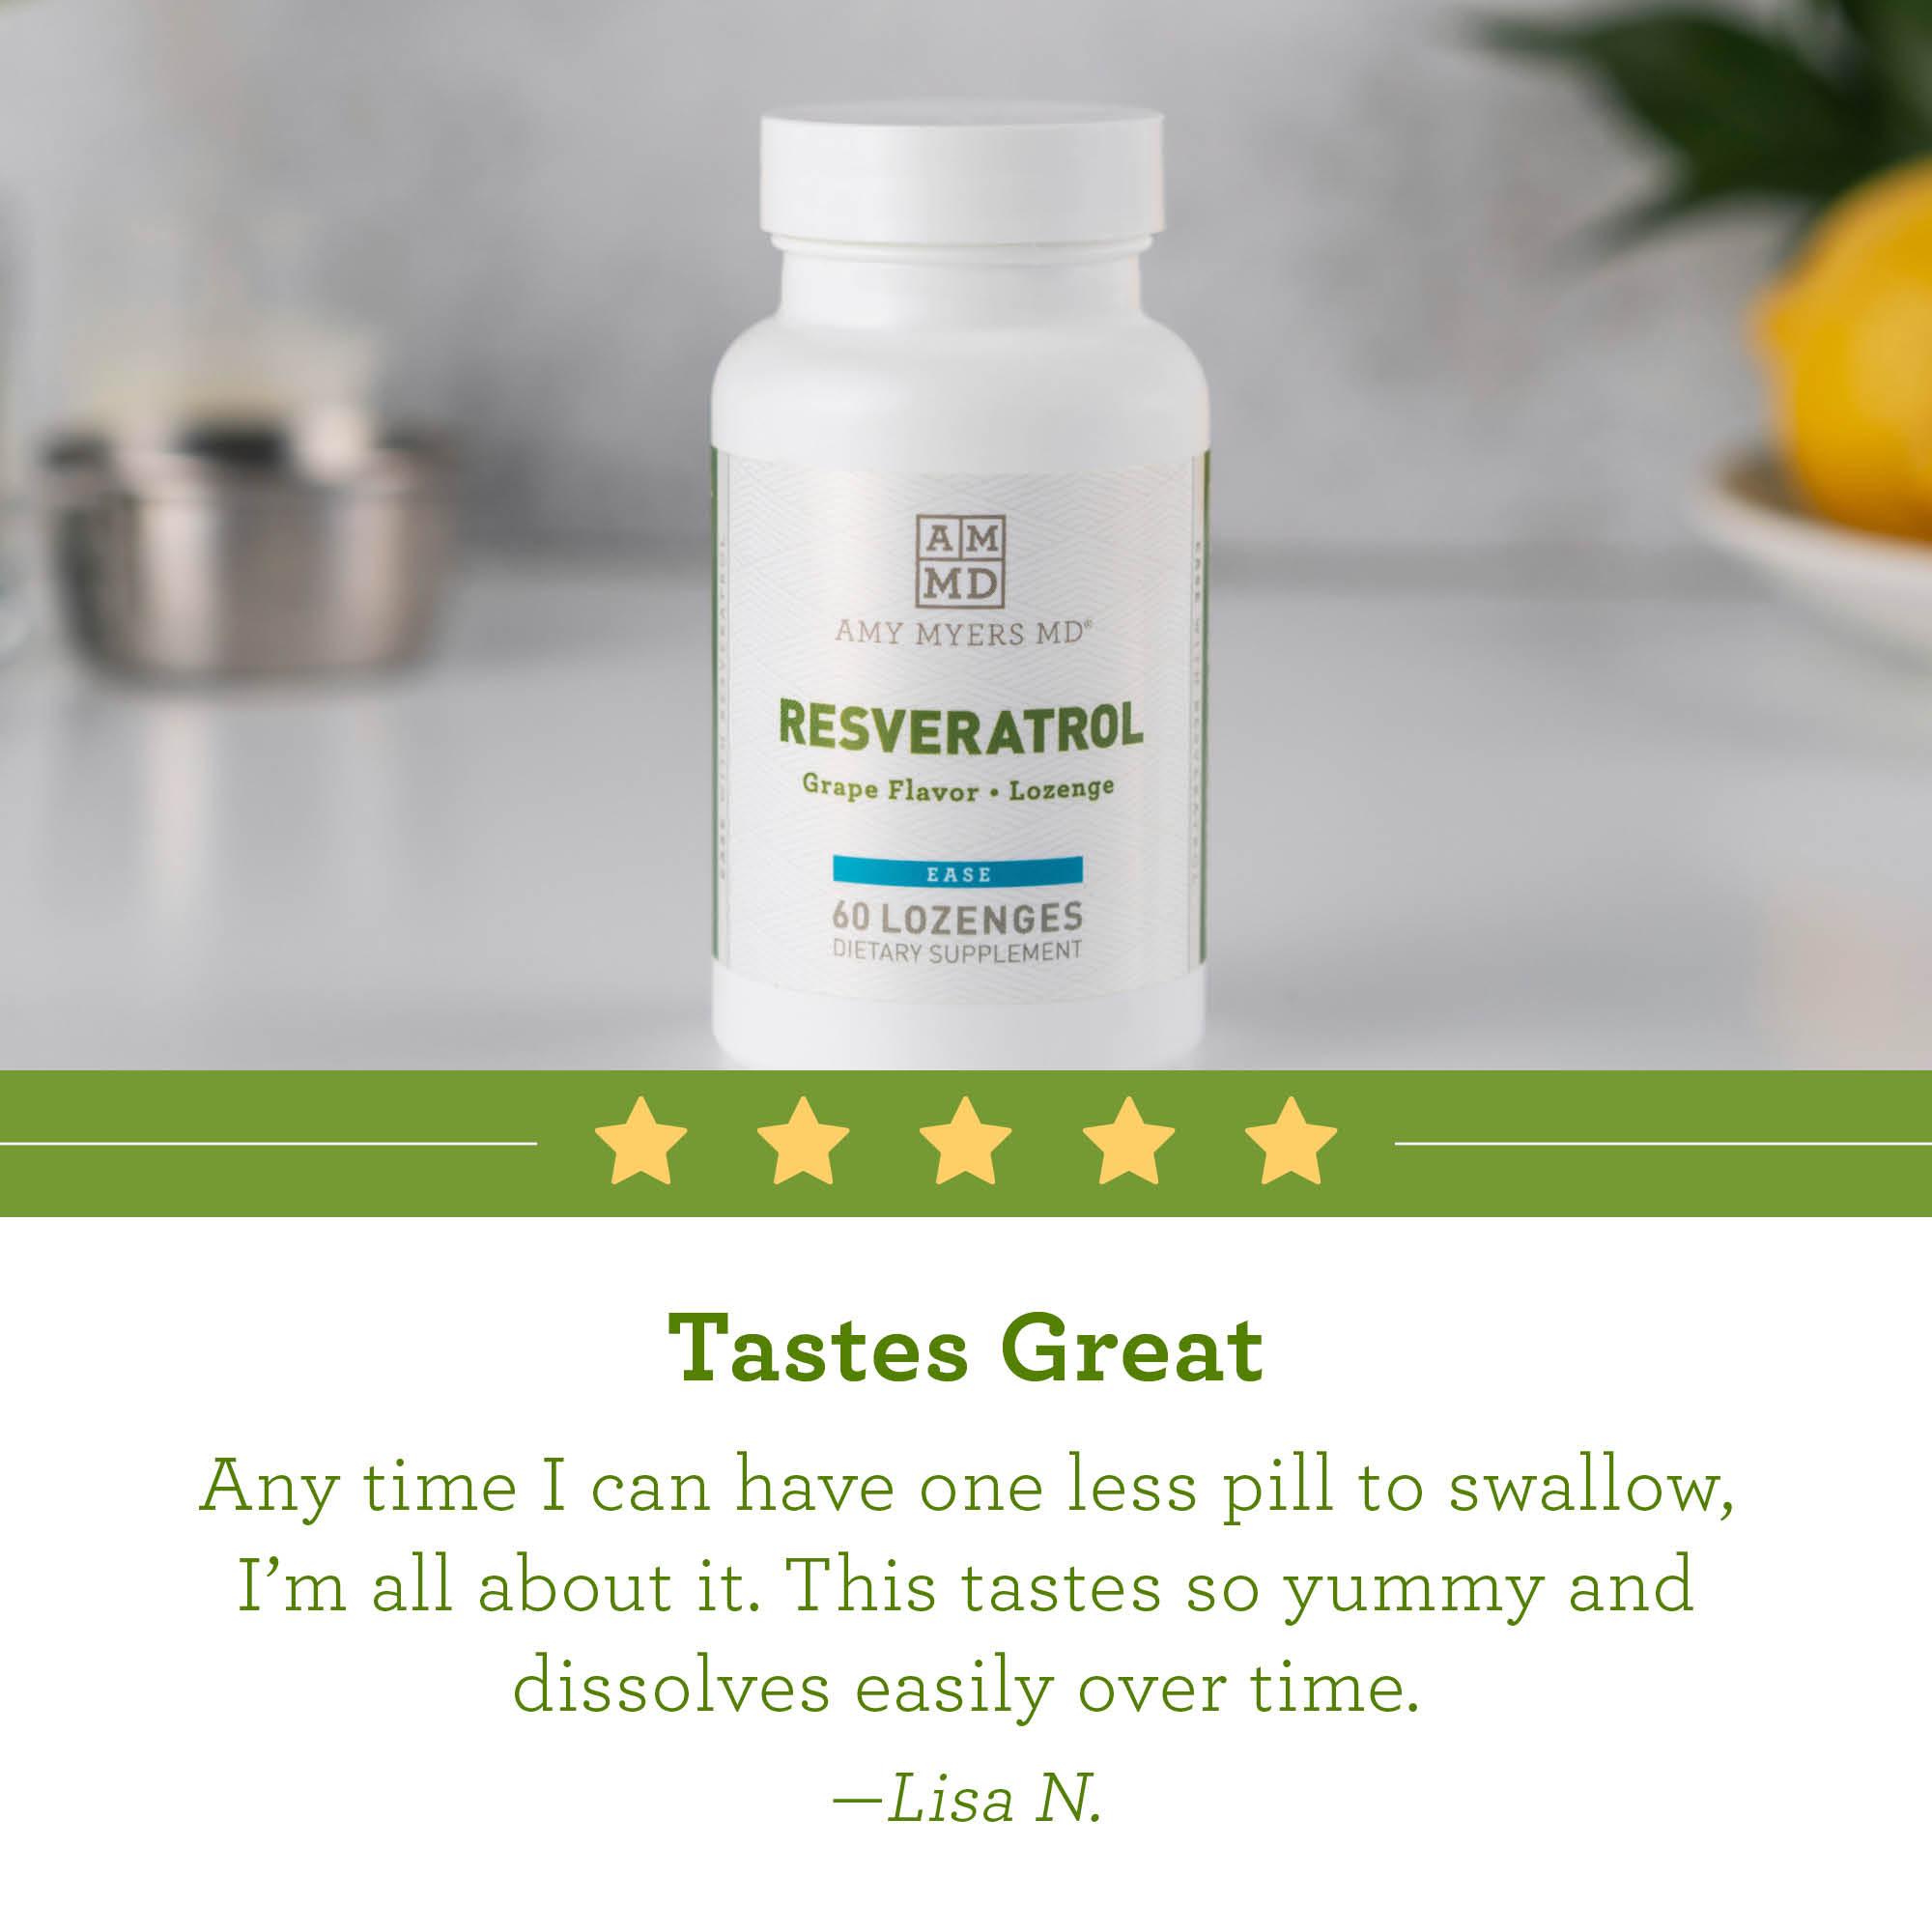 A bottle of Resveratrol Supplement on a tabletop with reviews - Reviews Image - Amy Myers MD®